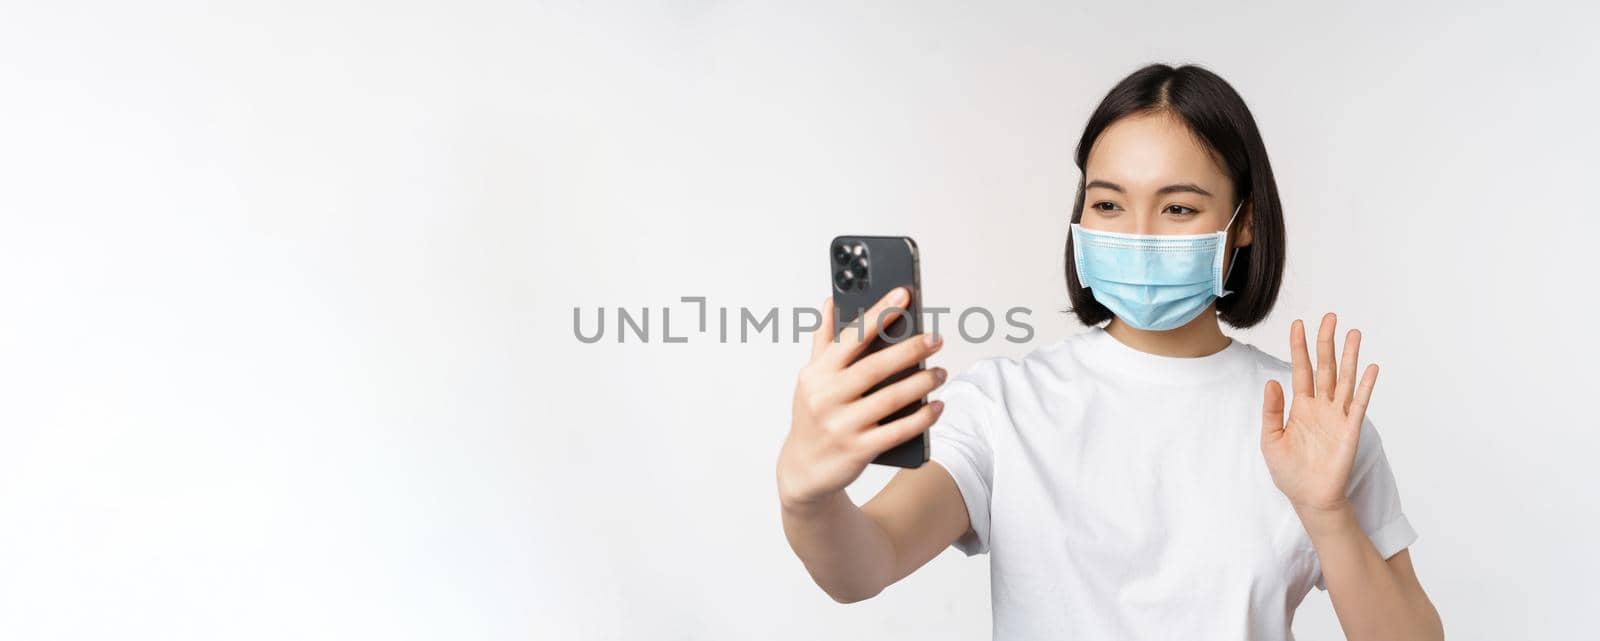 Health and covid-19 concept. Modern asian girl, student in medical mask, video chat with mobile phone, waving hand at smartphone app, standing over white background.